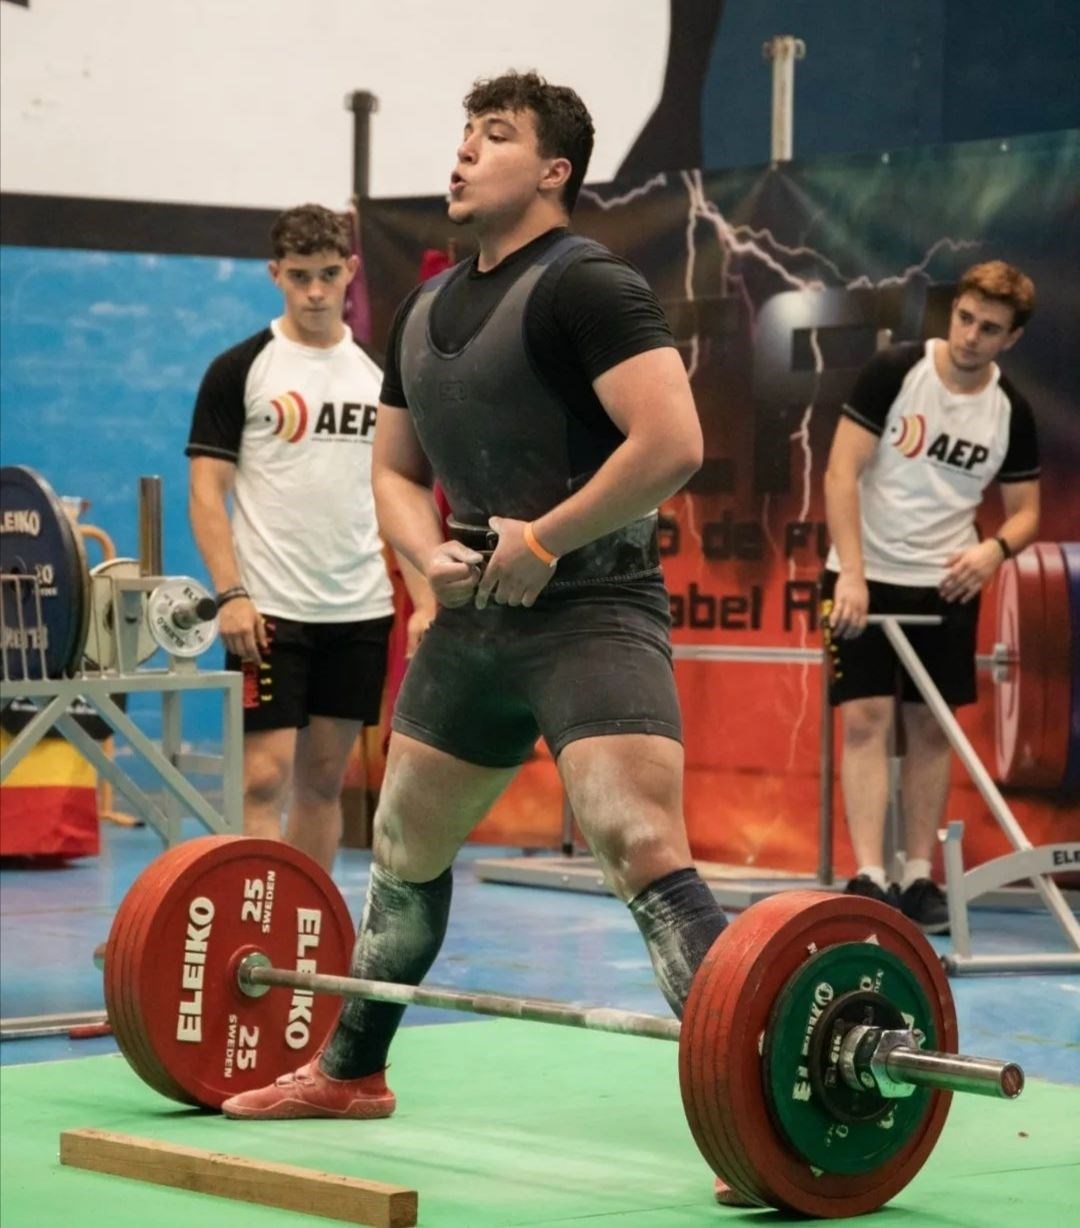 Joel Aragoneses deadlifted the heaviest weight at the Spanish junior powerlifting champs.